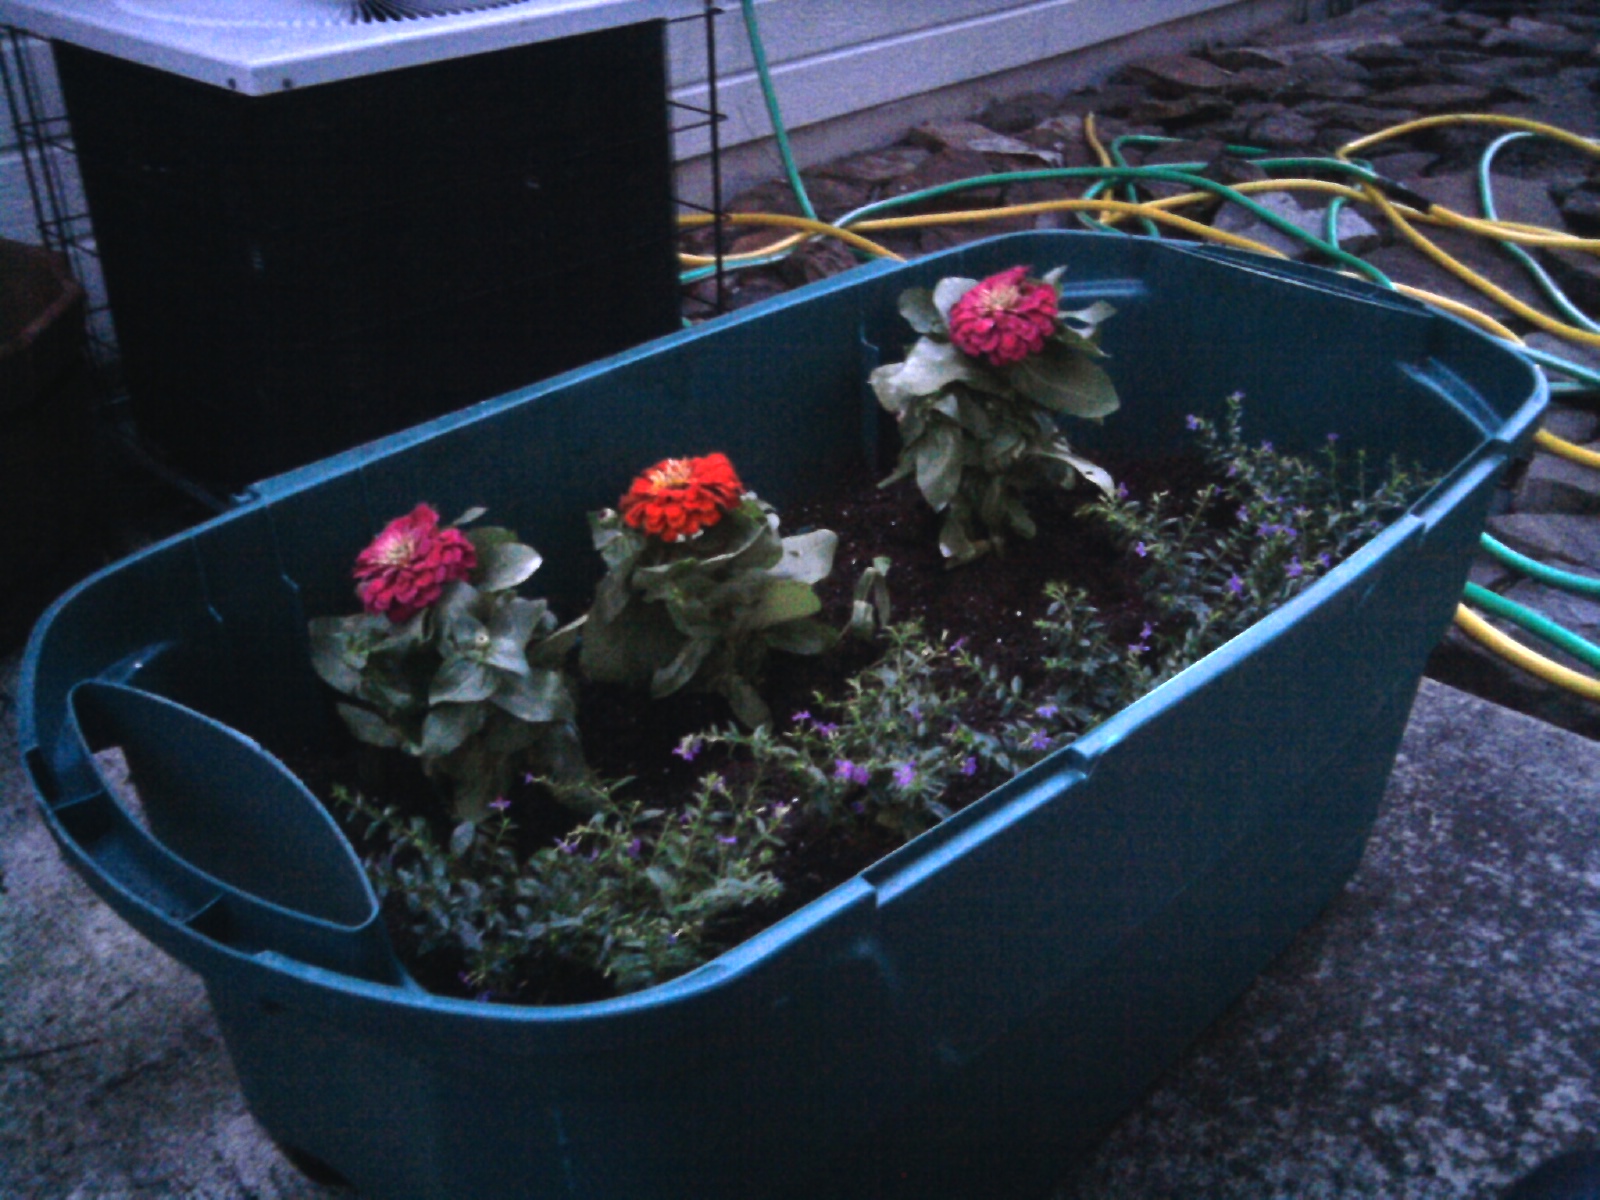 Redneck city gardening-otherwise known as container gardening